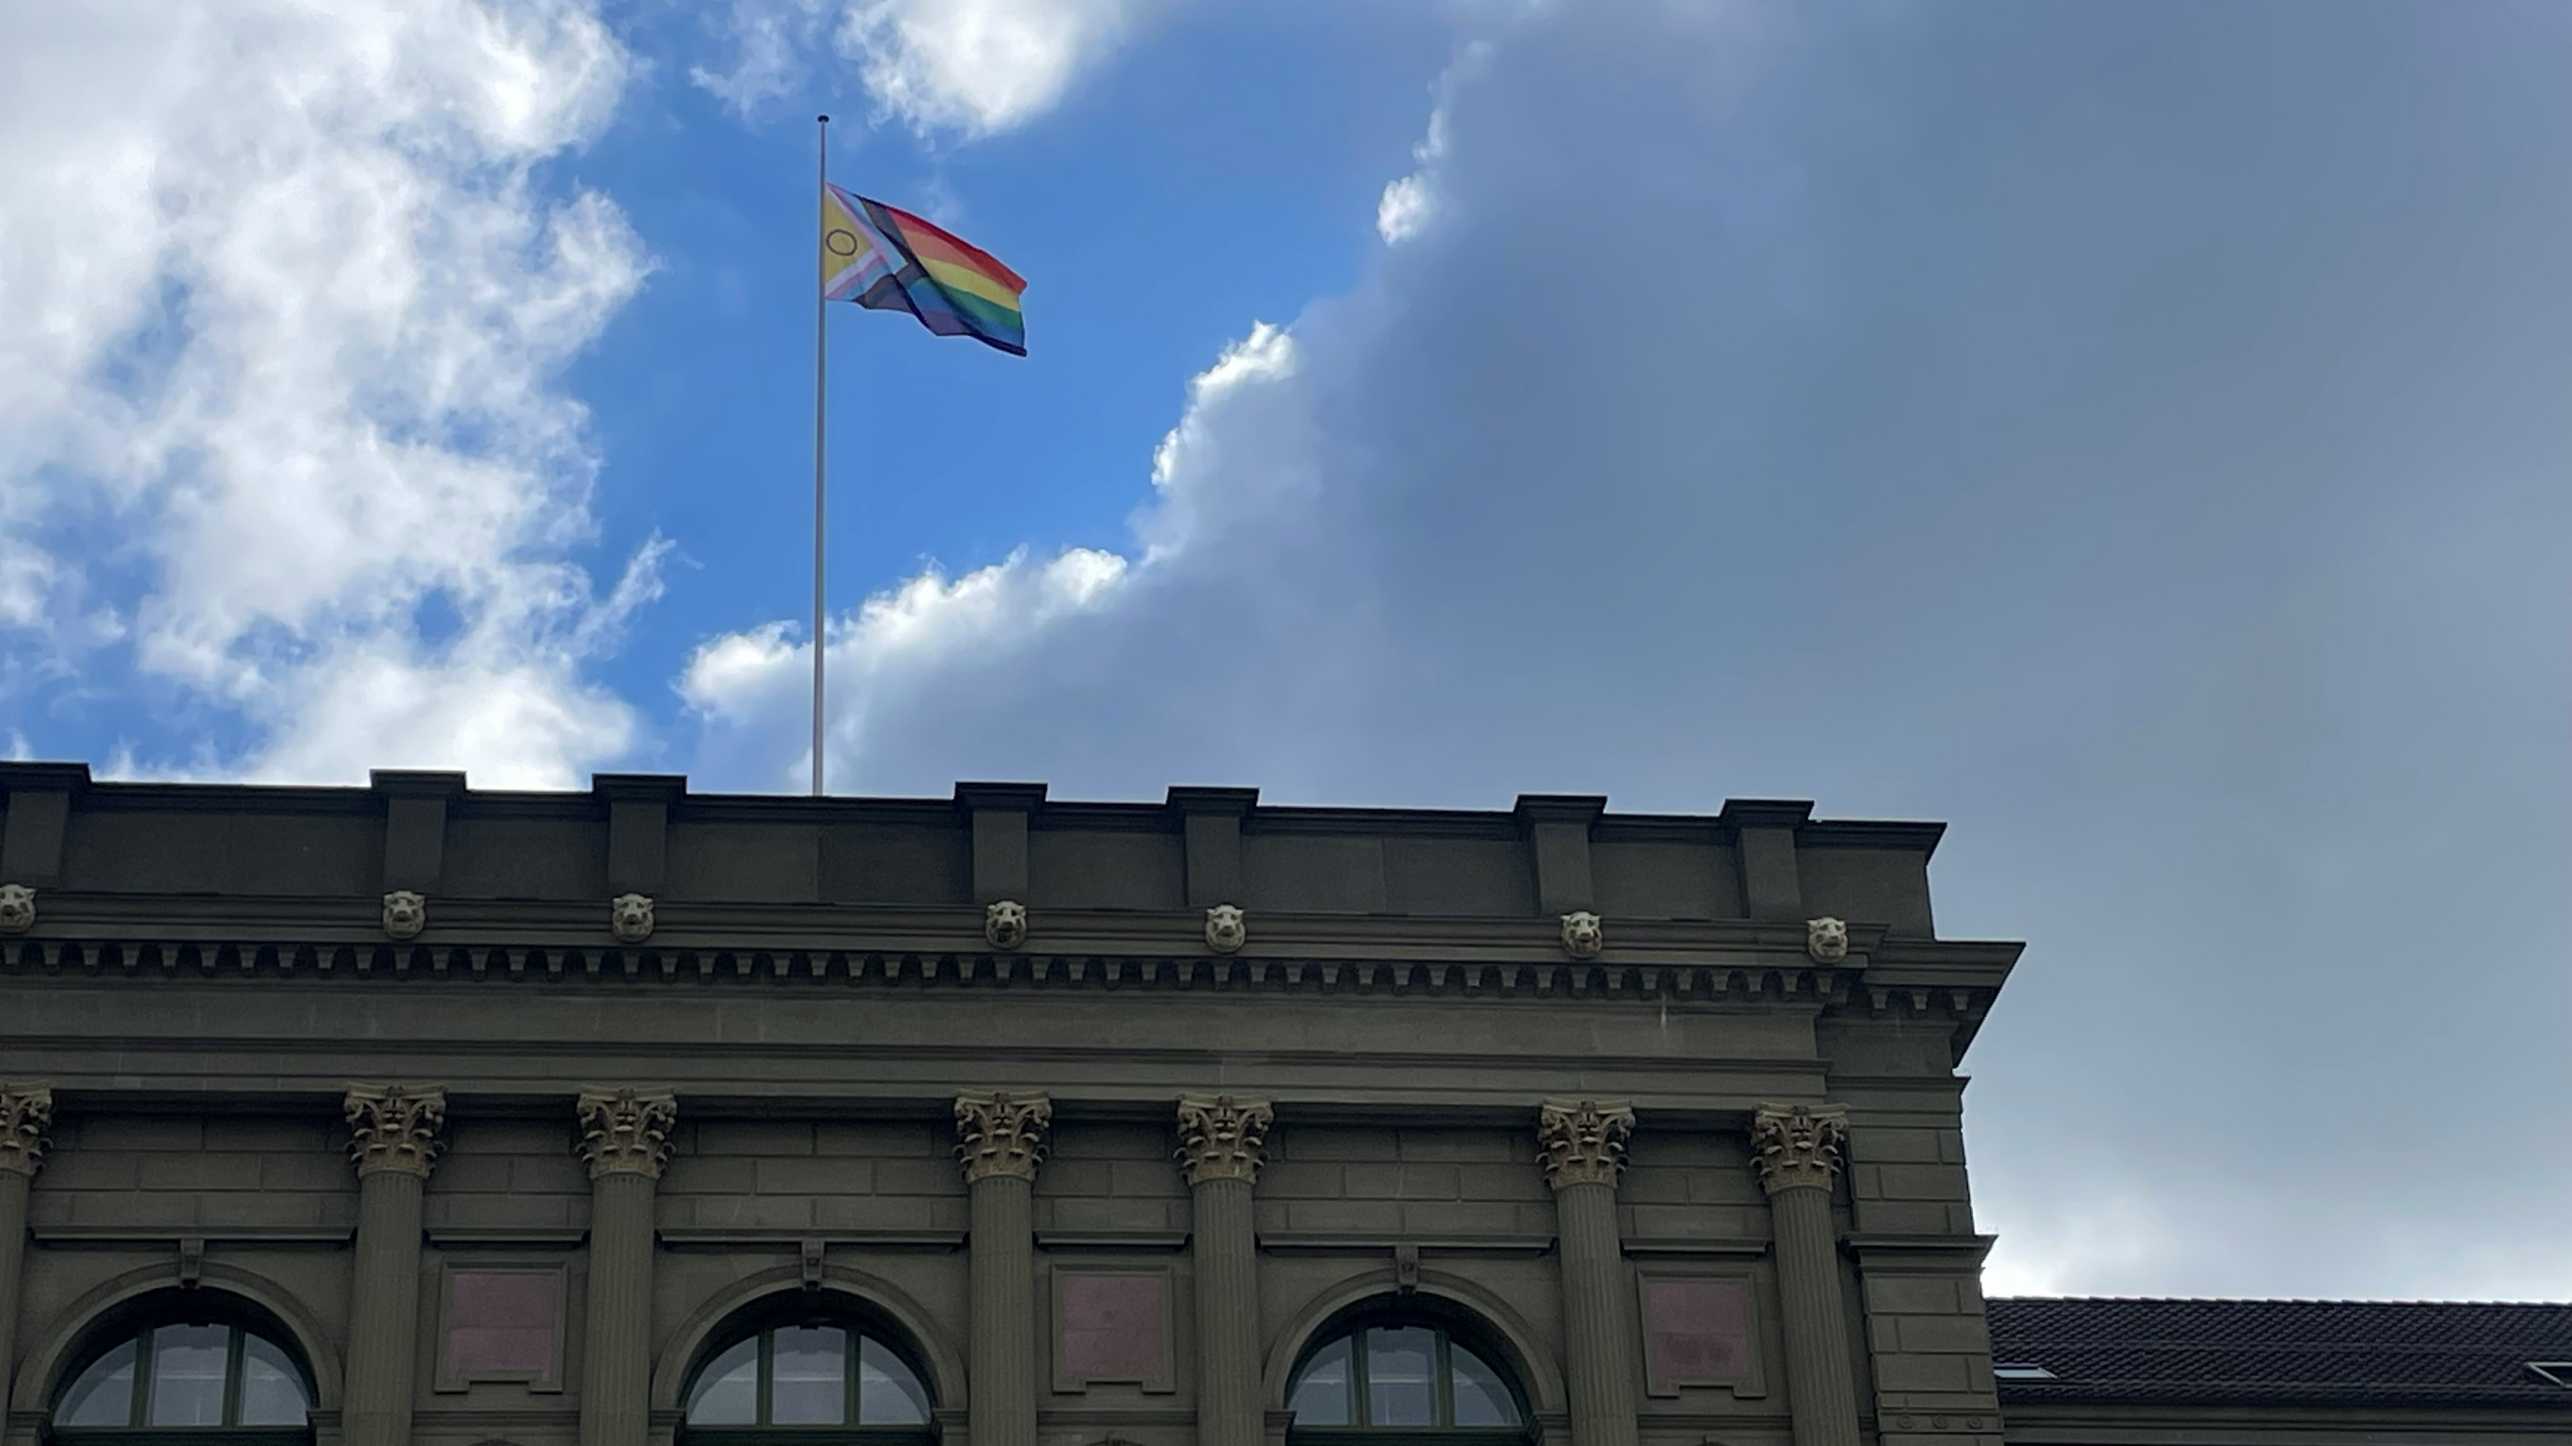 Progress Pride flag on the main building of ETH Zurich